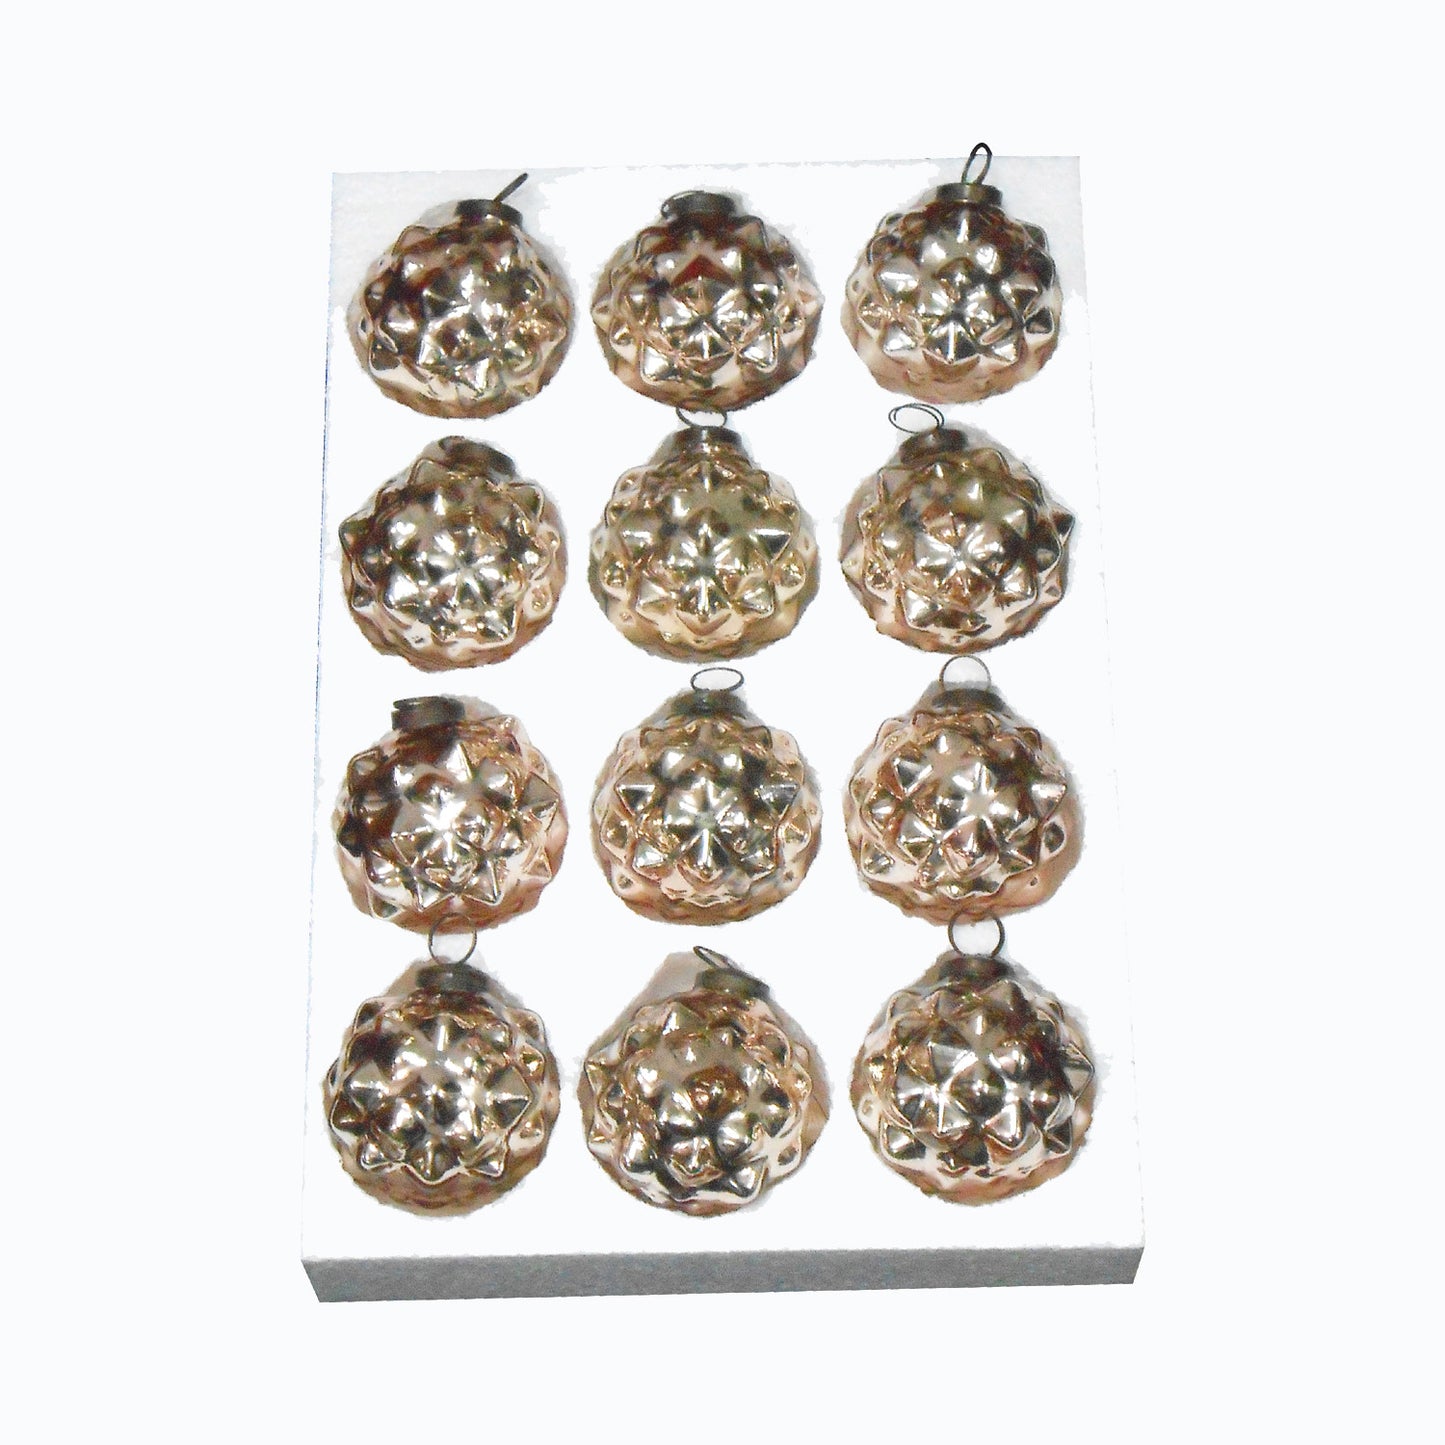 GiftBay ORN-105(S/12) Antique-look Glass Ornament 3" H, Set of 12 for Christmas Tree Decorations